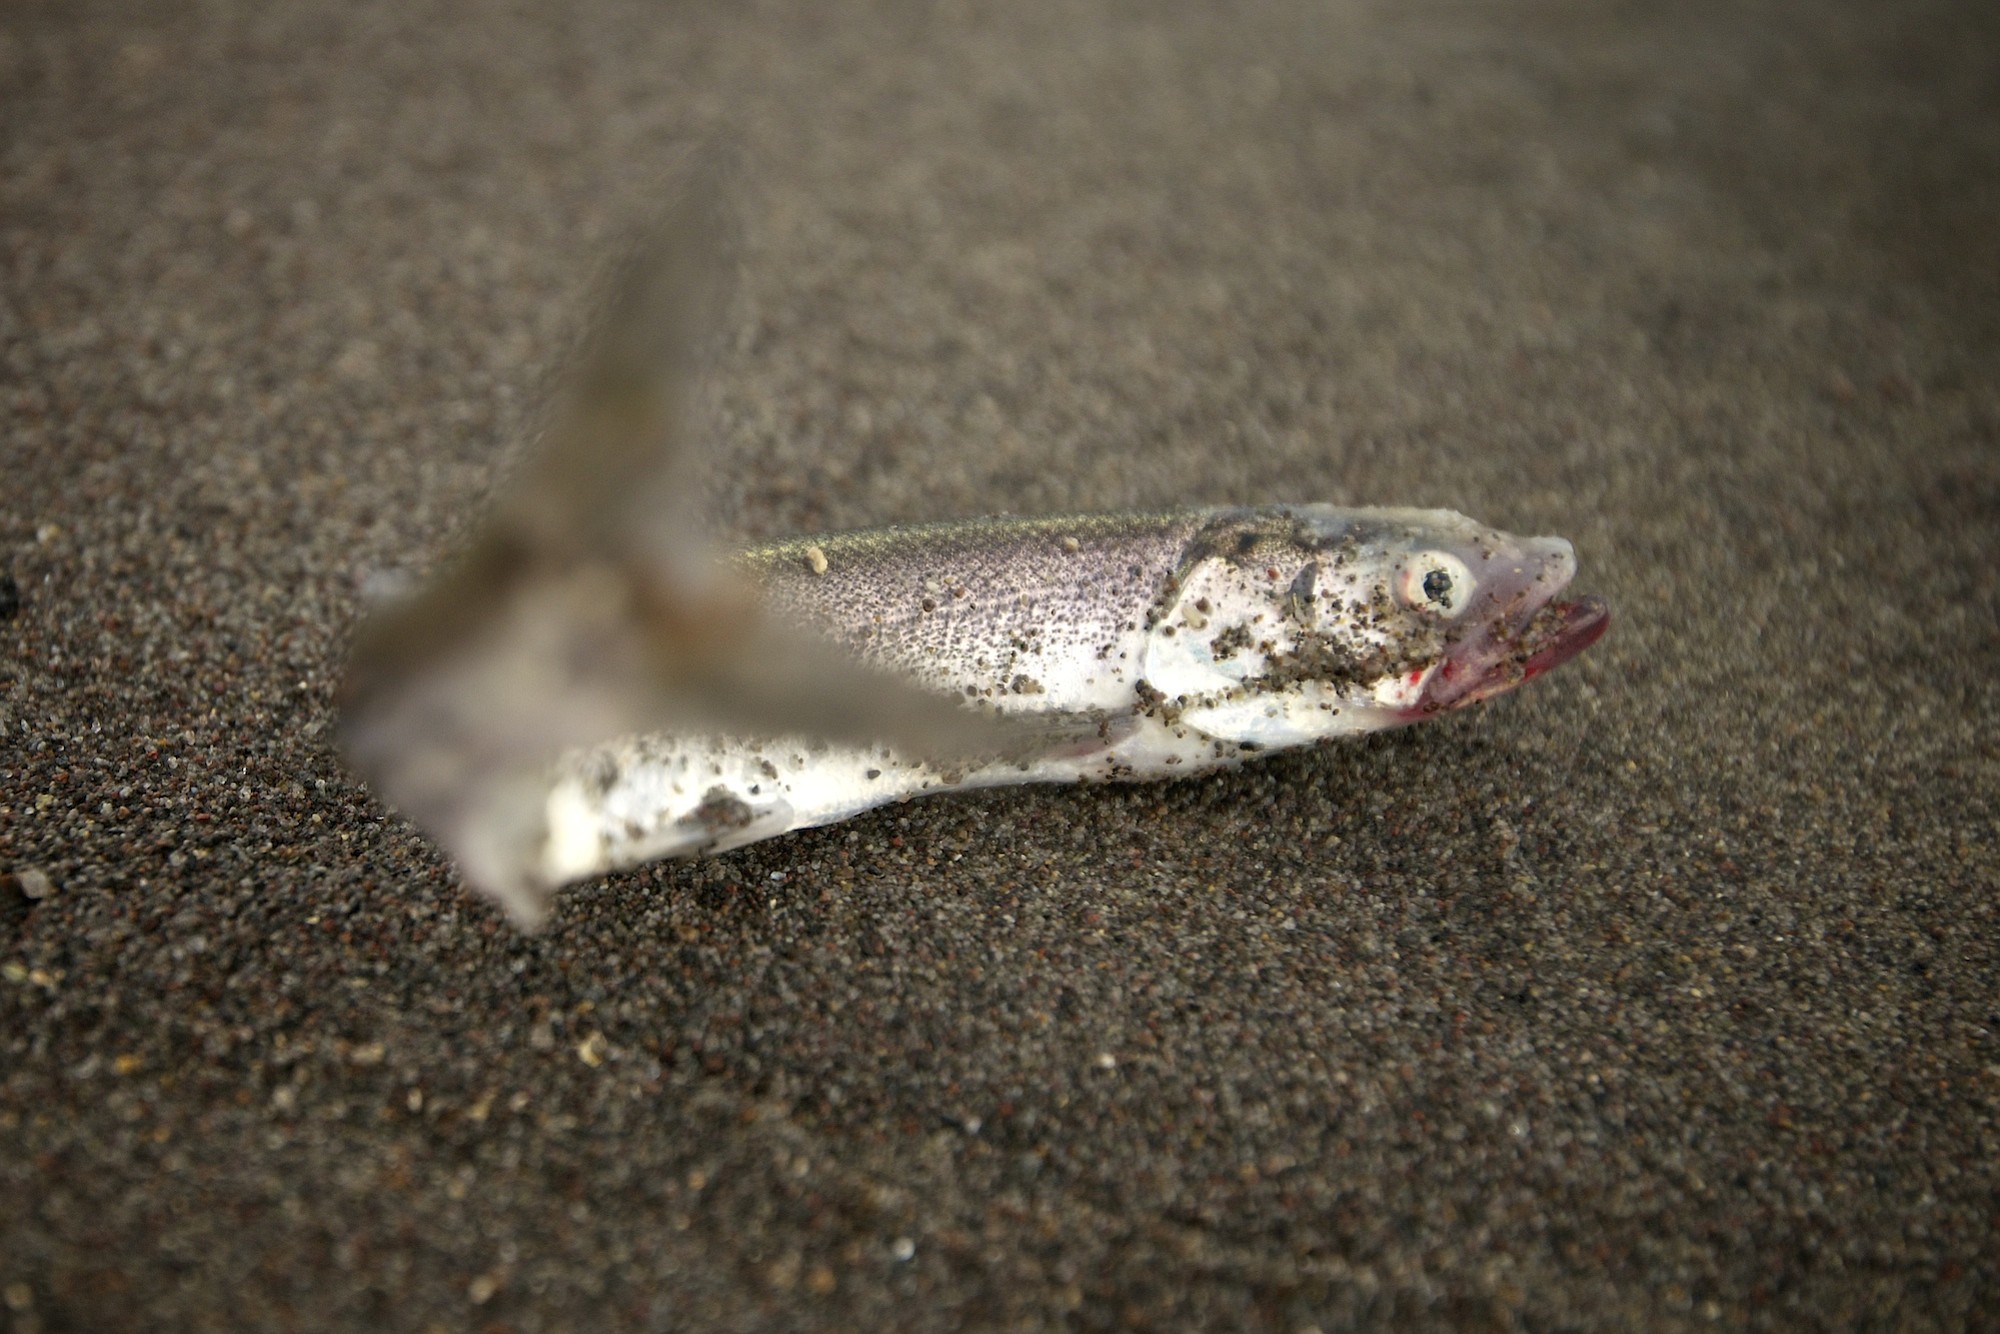 State biologists estimate the return to the Columbia River and tributaries in 2014 was 186 million smelt, the largest in at least 15 years.